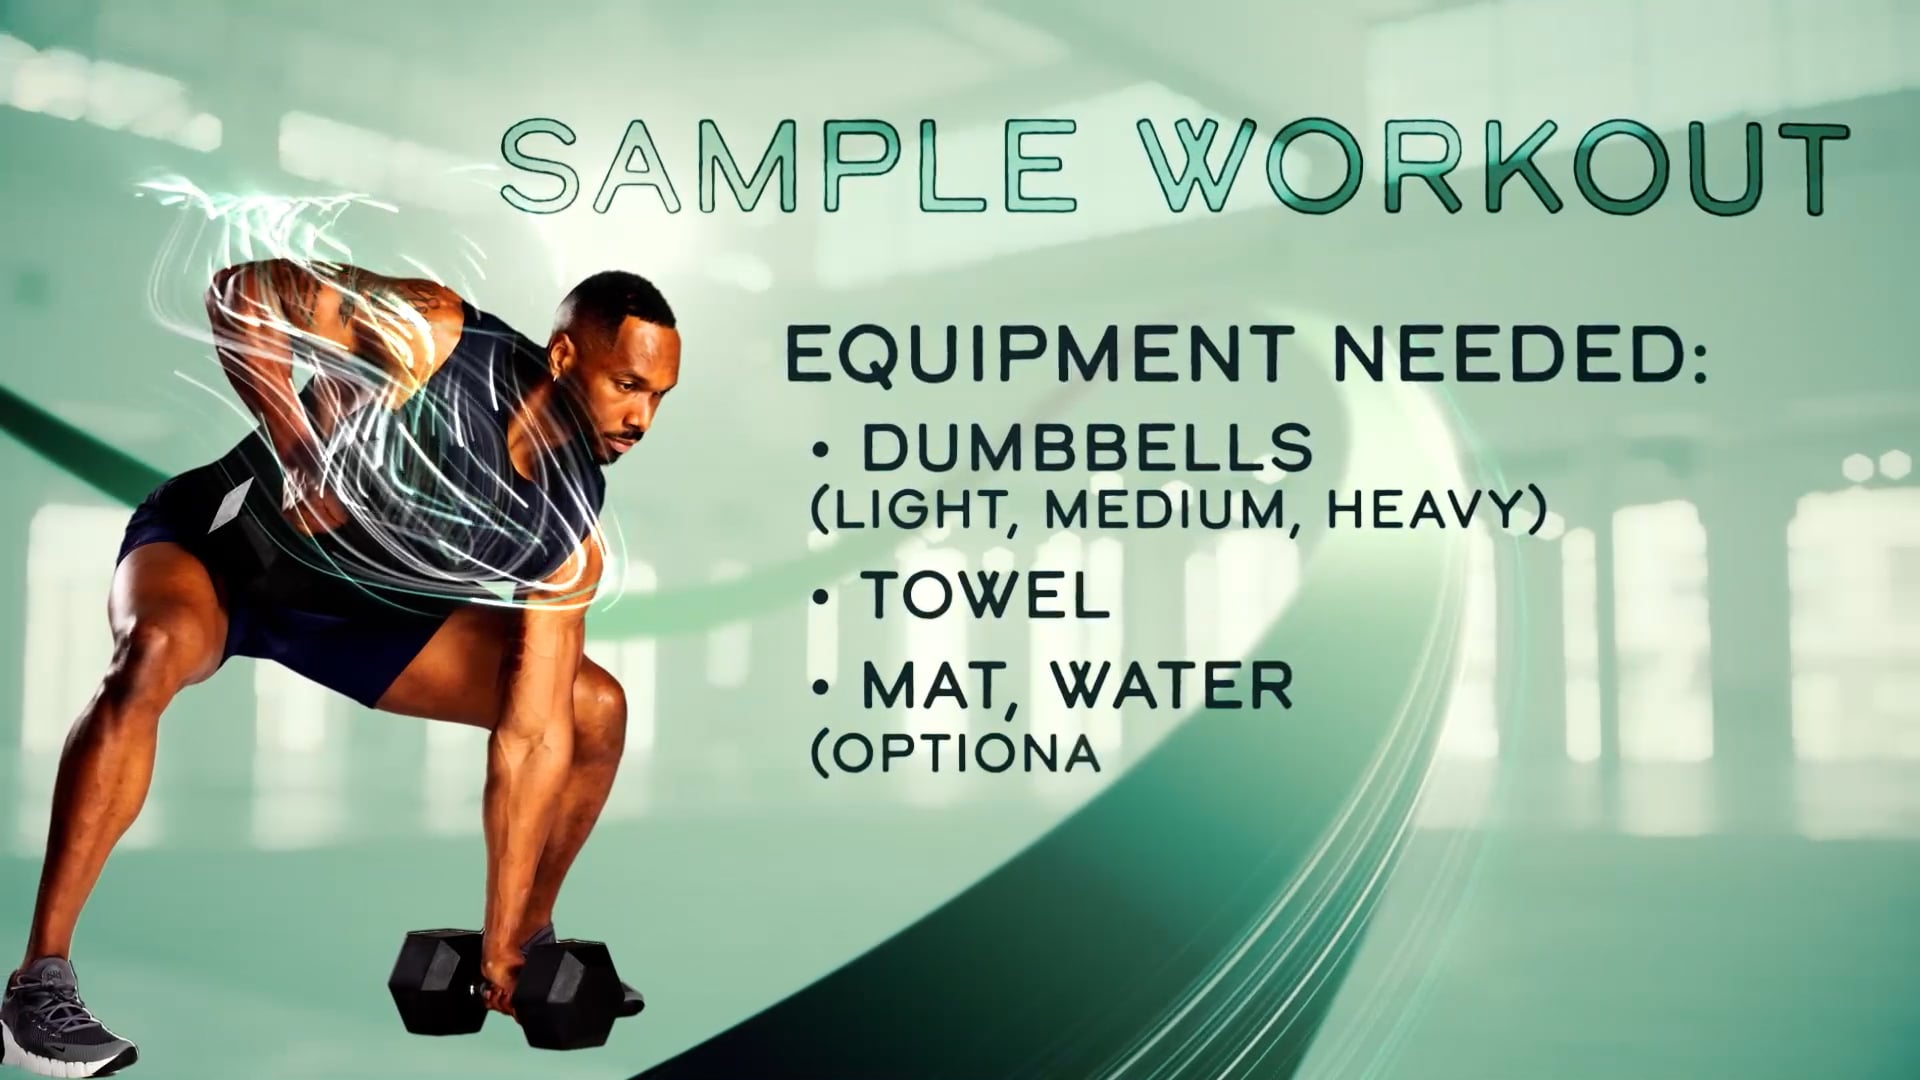 CHOP WOOD CARRY WATER Sample Workout on Vimeo